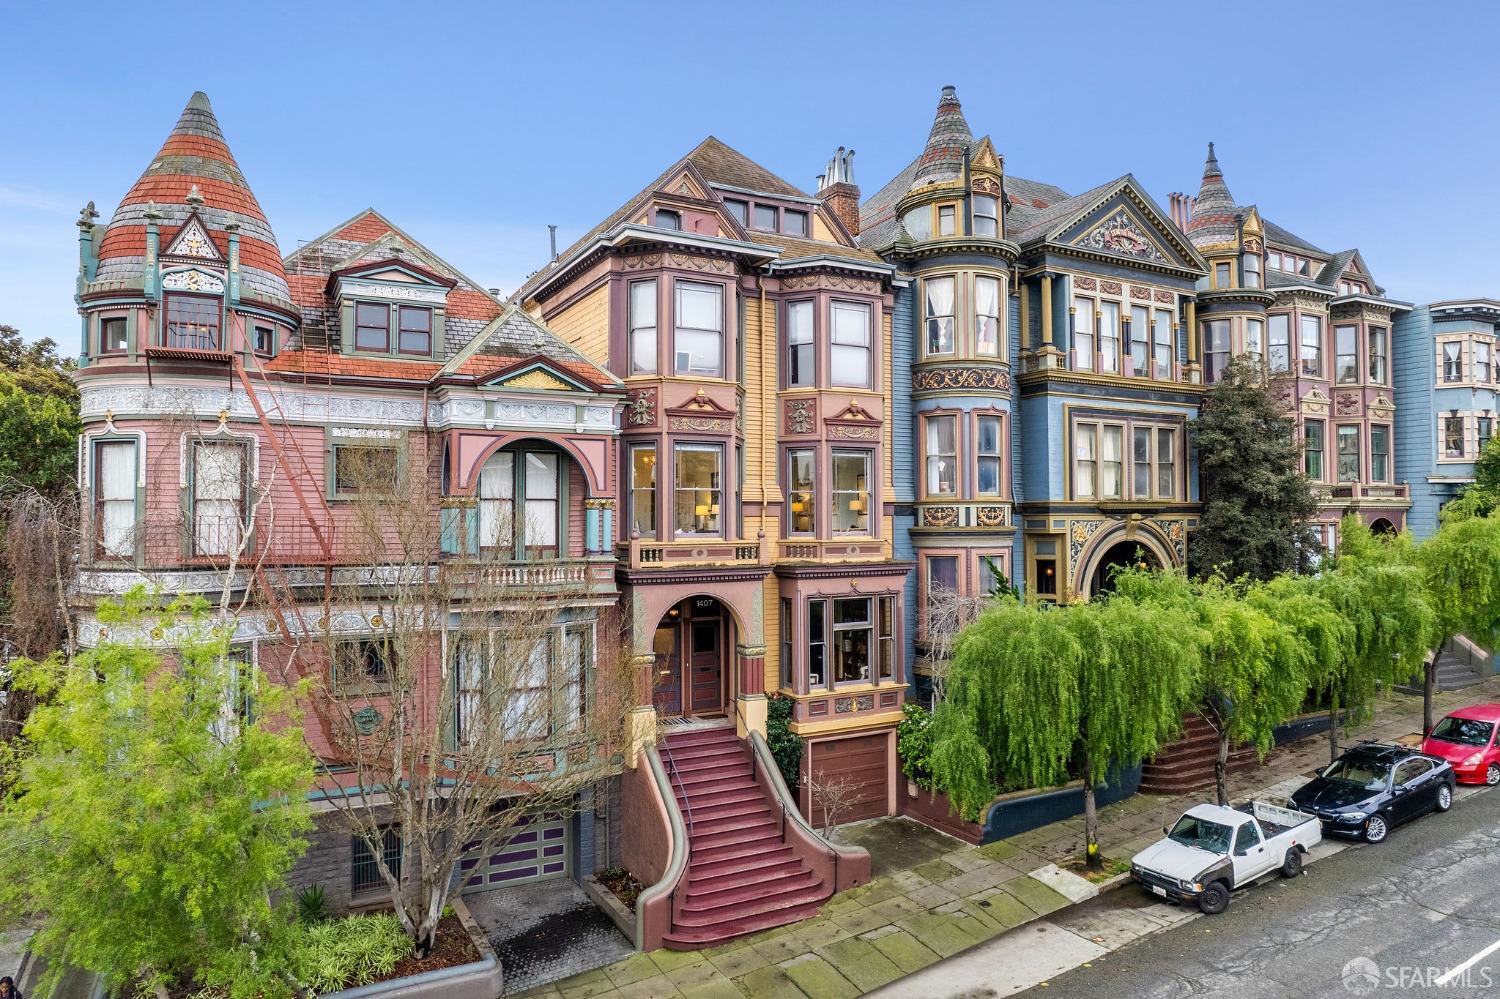 Photo of 1407 Golden Gate Ave in San Francisco, CA